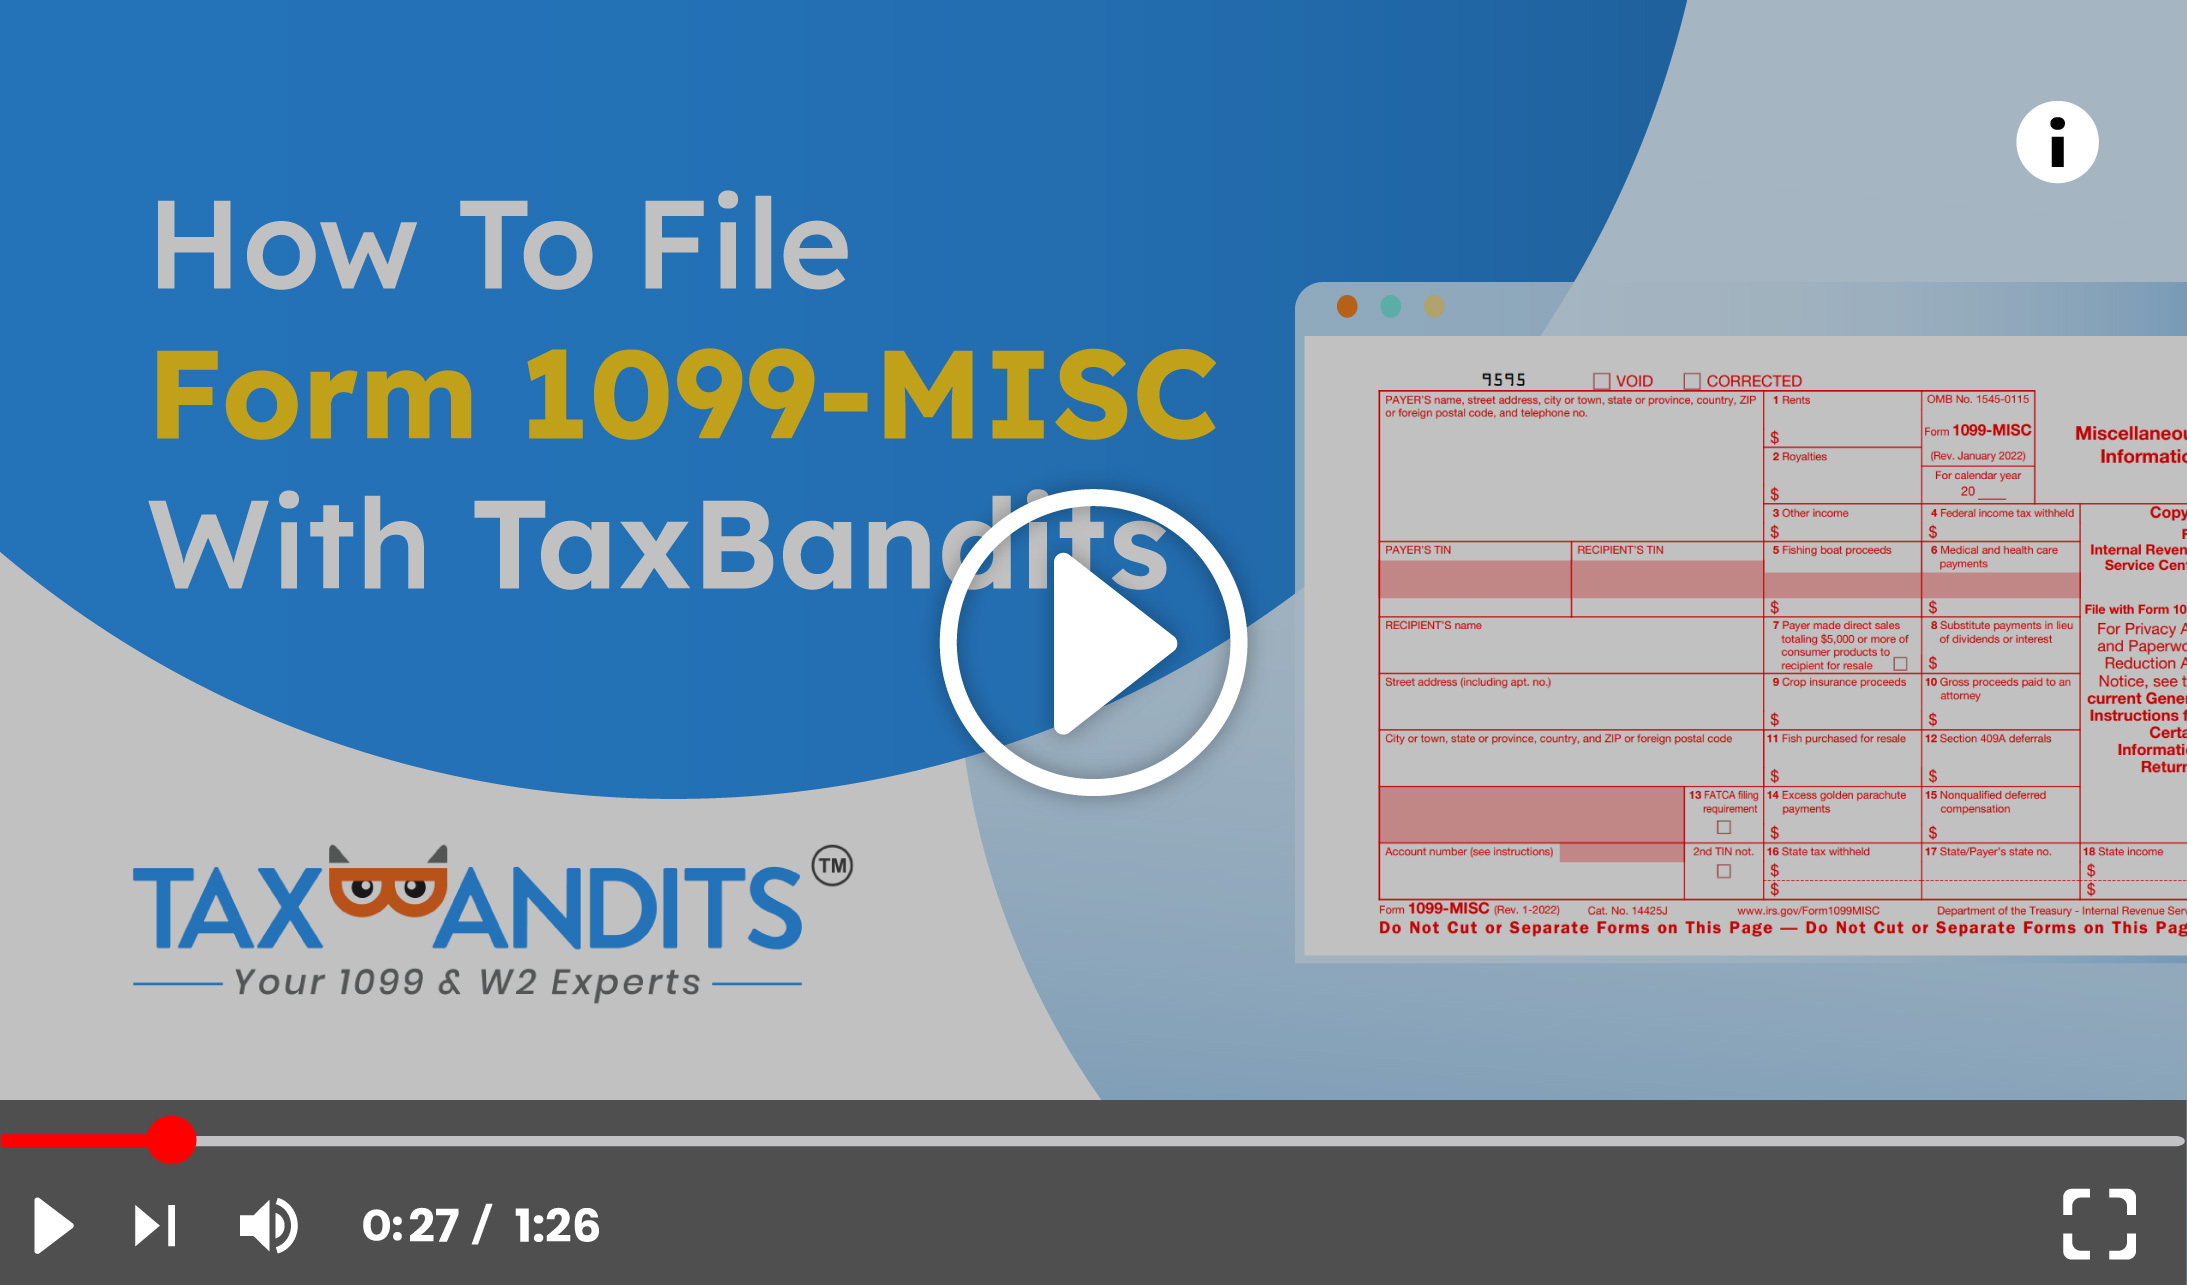 How to file form 1099?